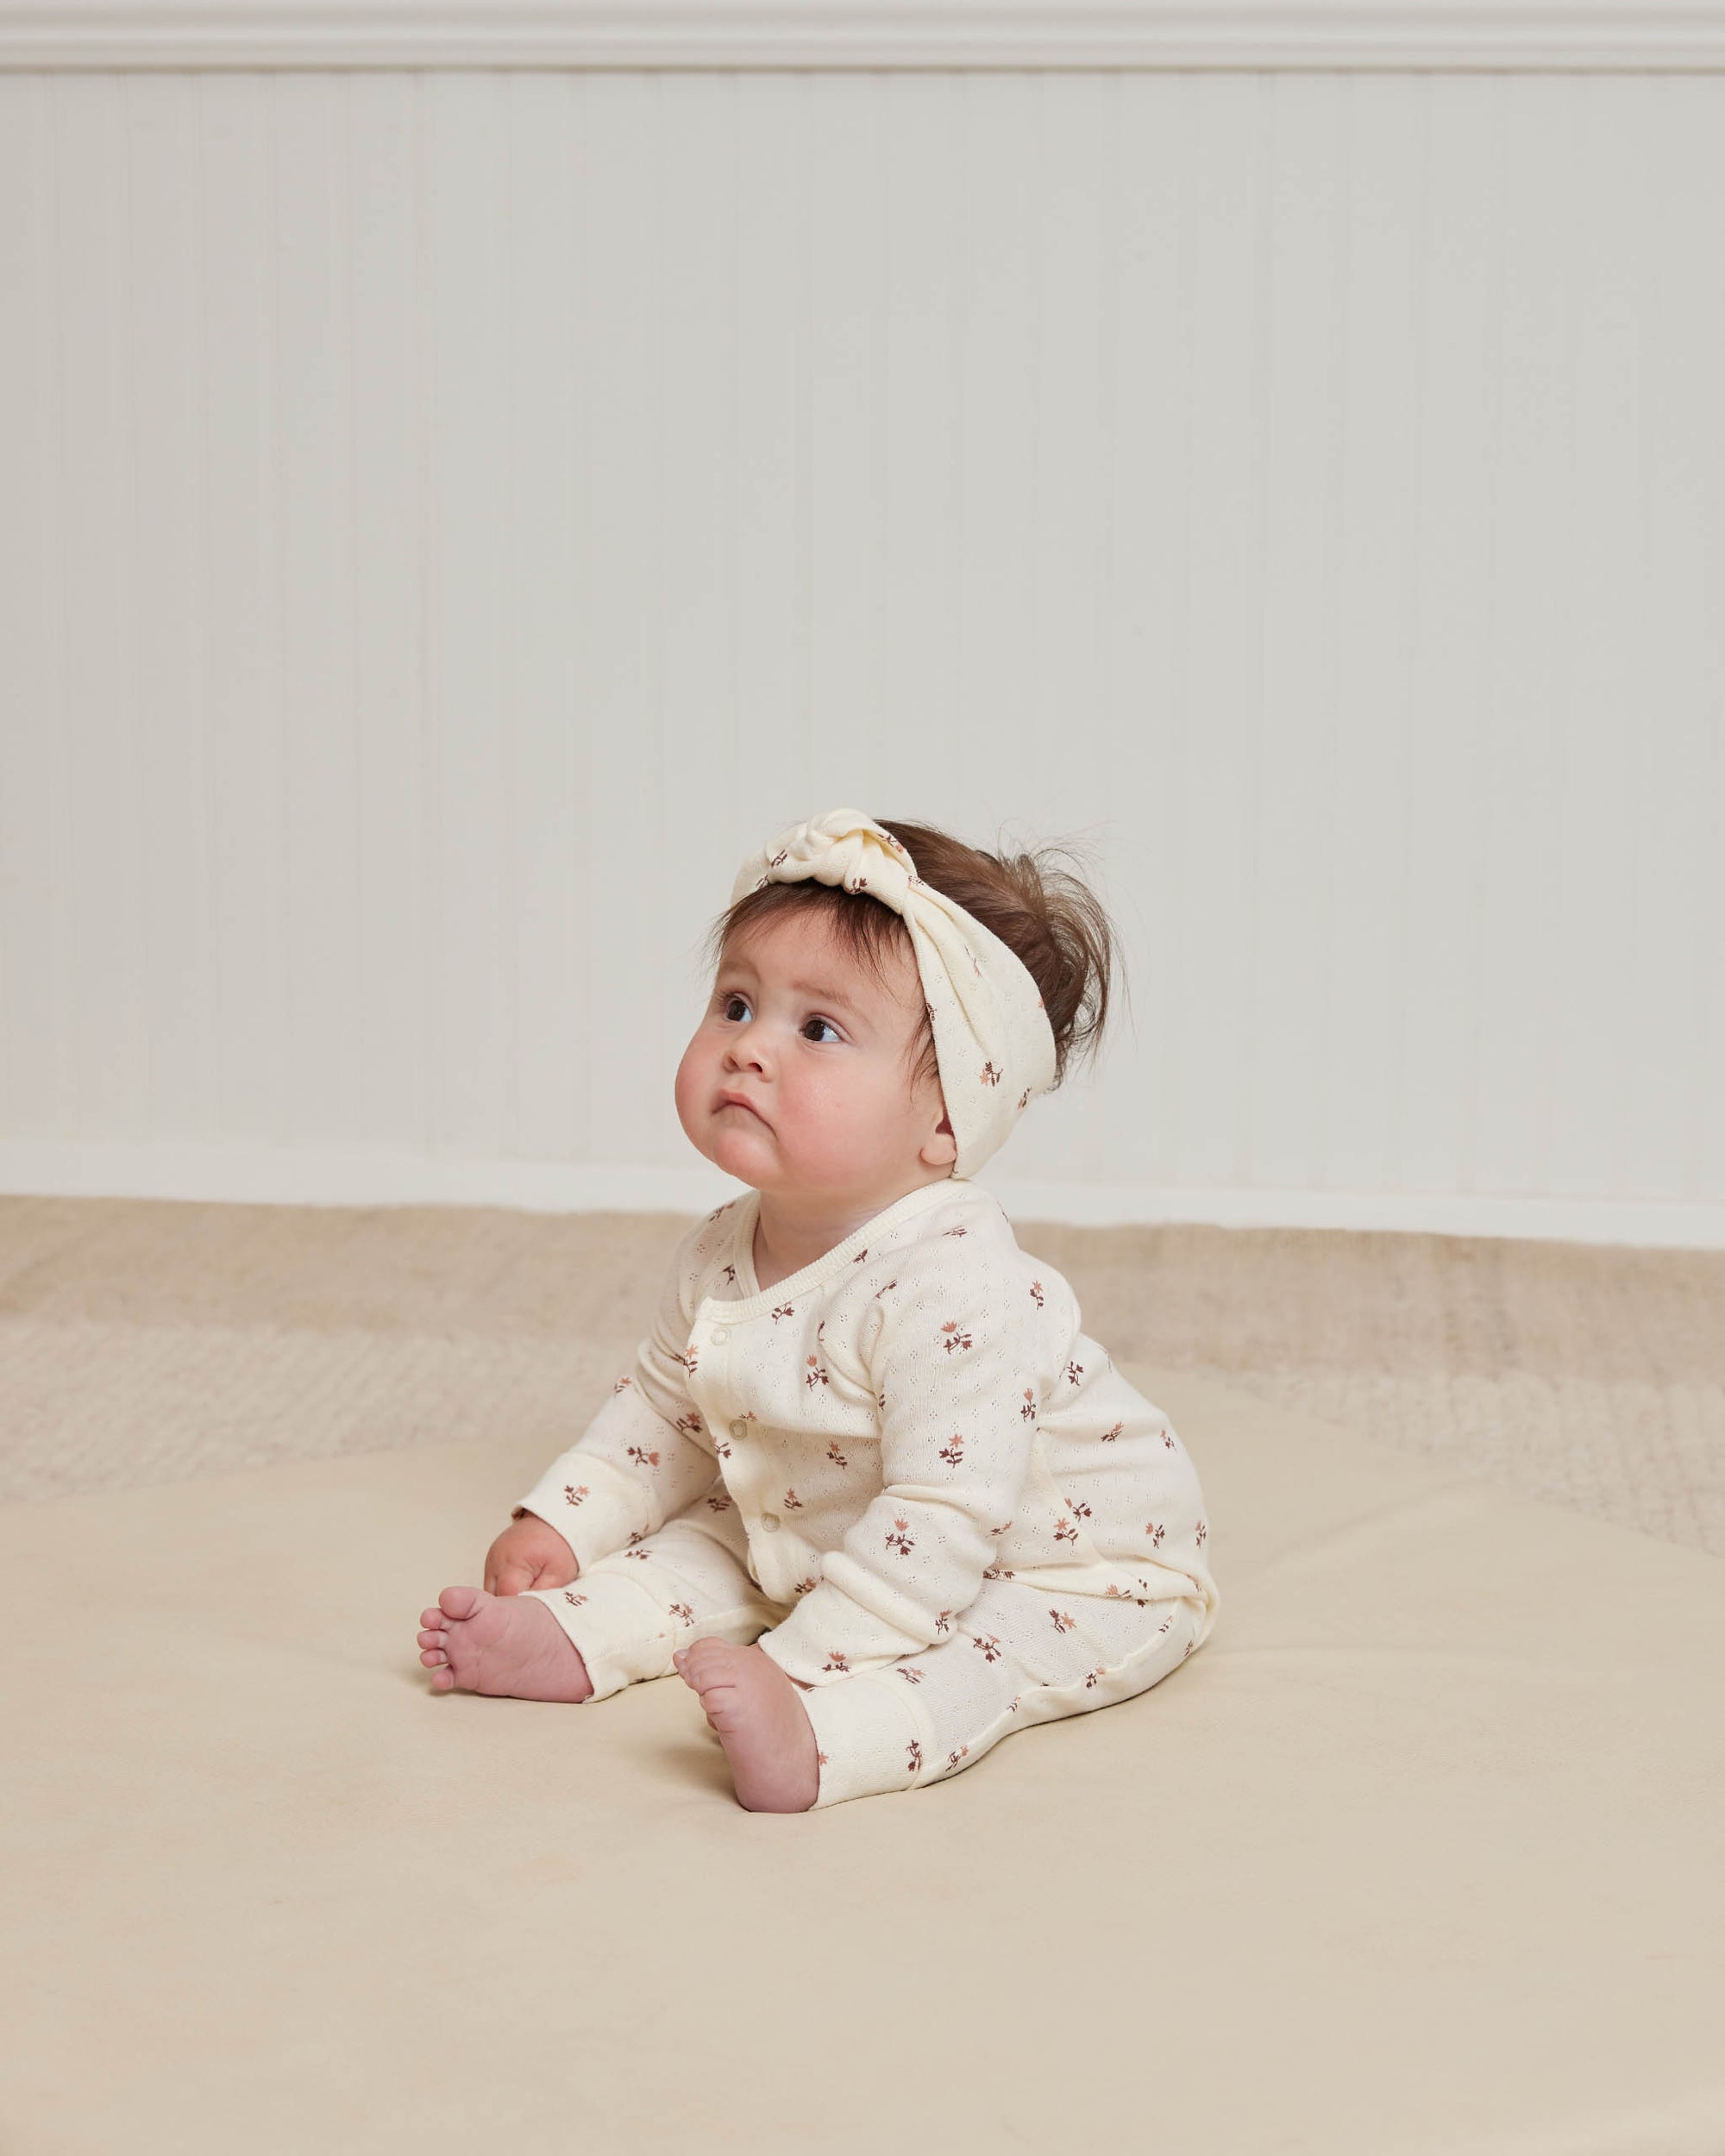 QUINCY MAE KNOTTED HEADBAND / ROSE FLEUR